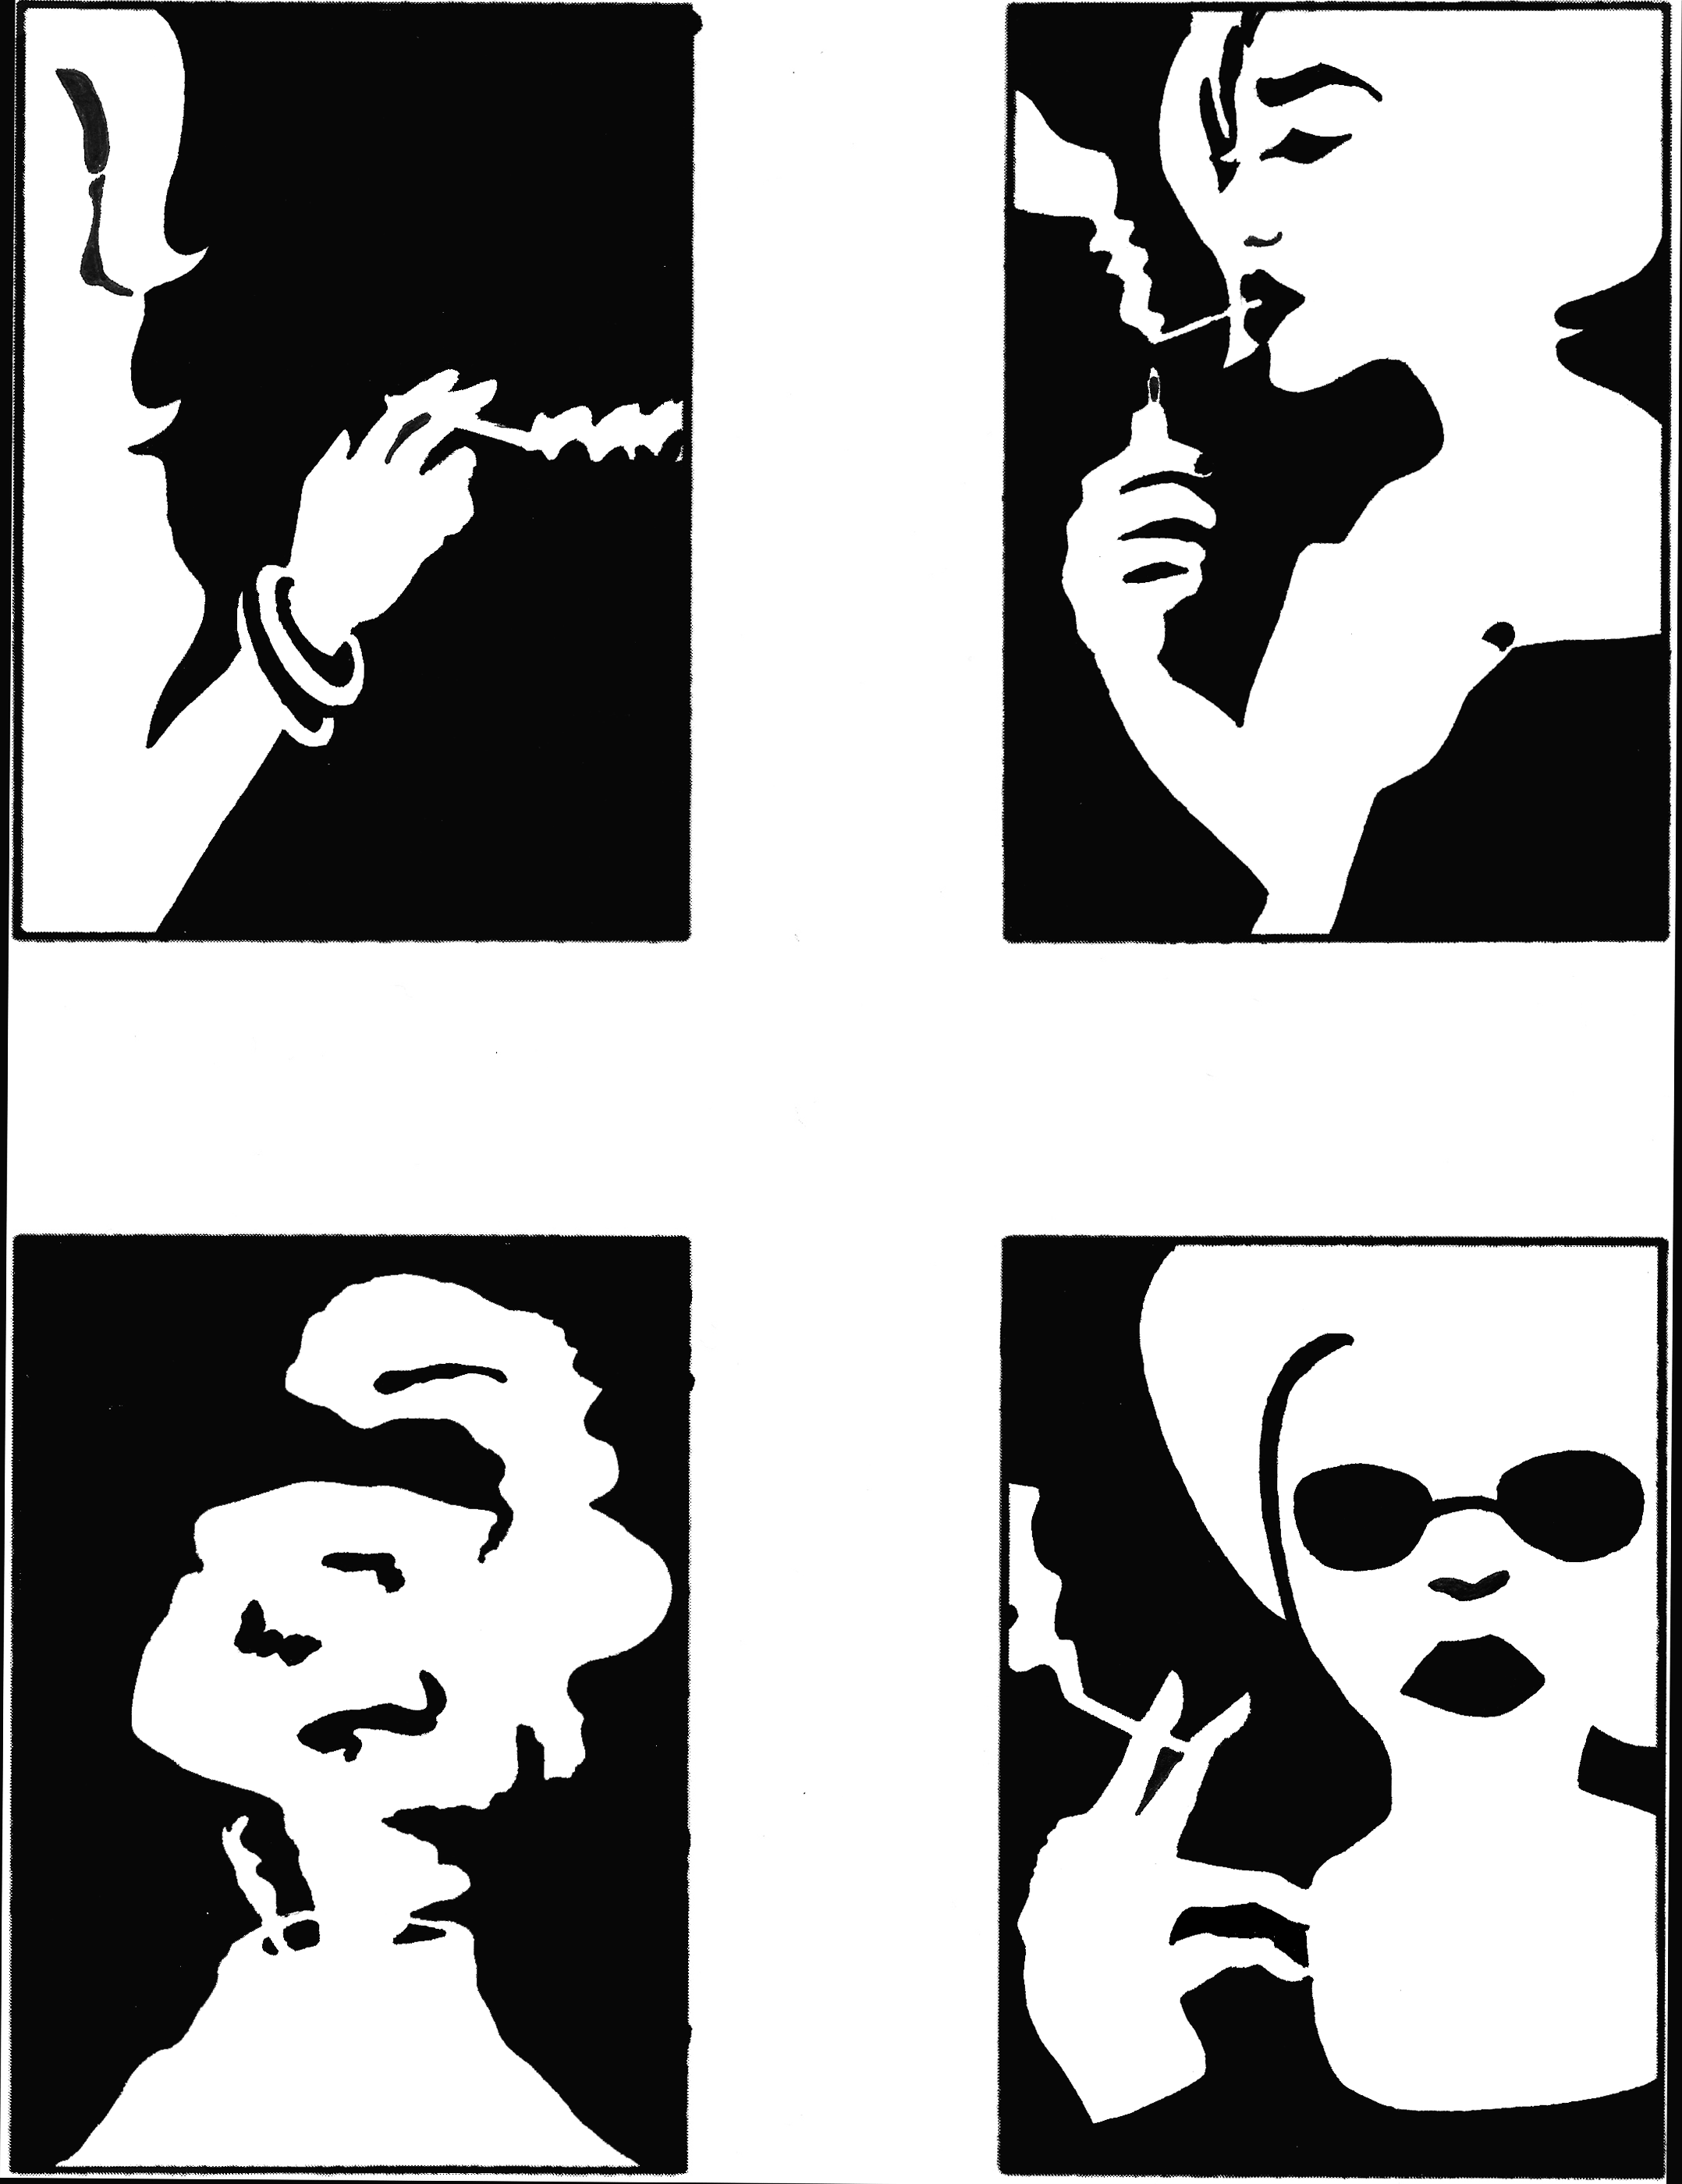 Thumbnails of simplified, 'self-explanatory' visuals for the word 'Smoke'